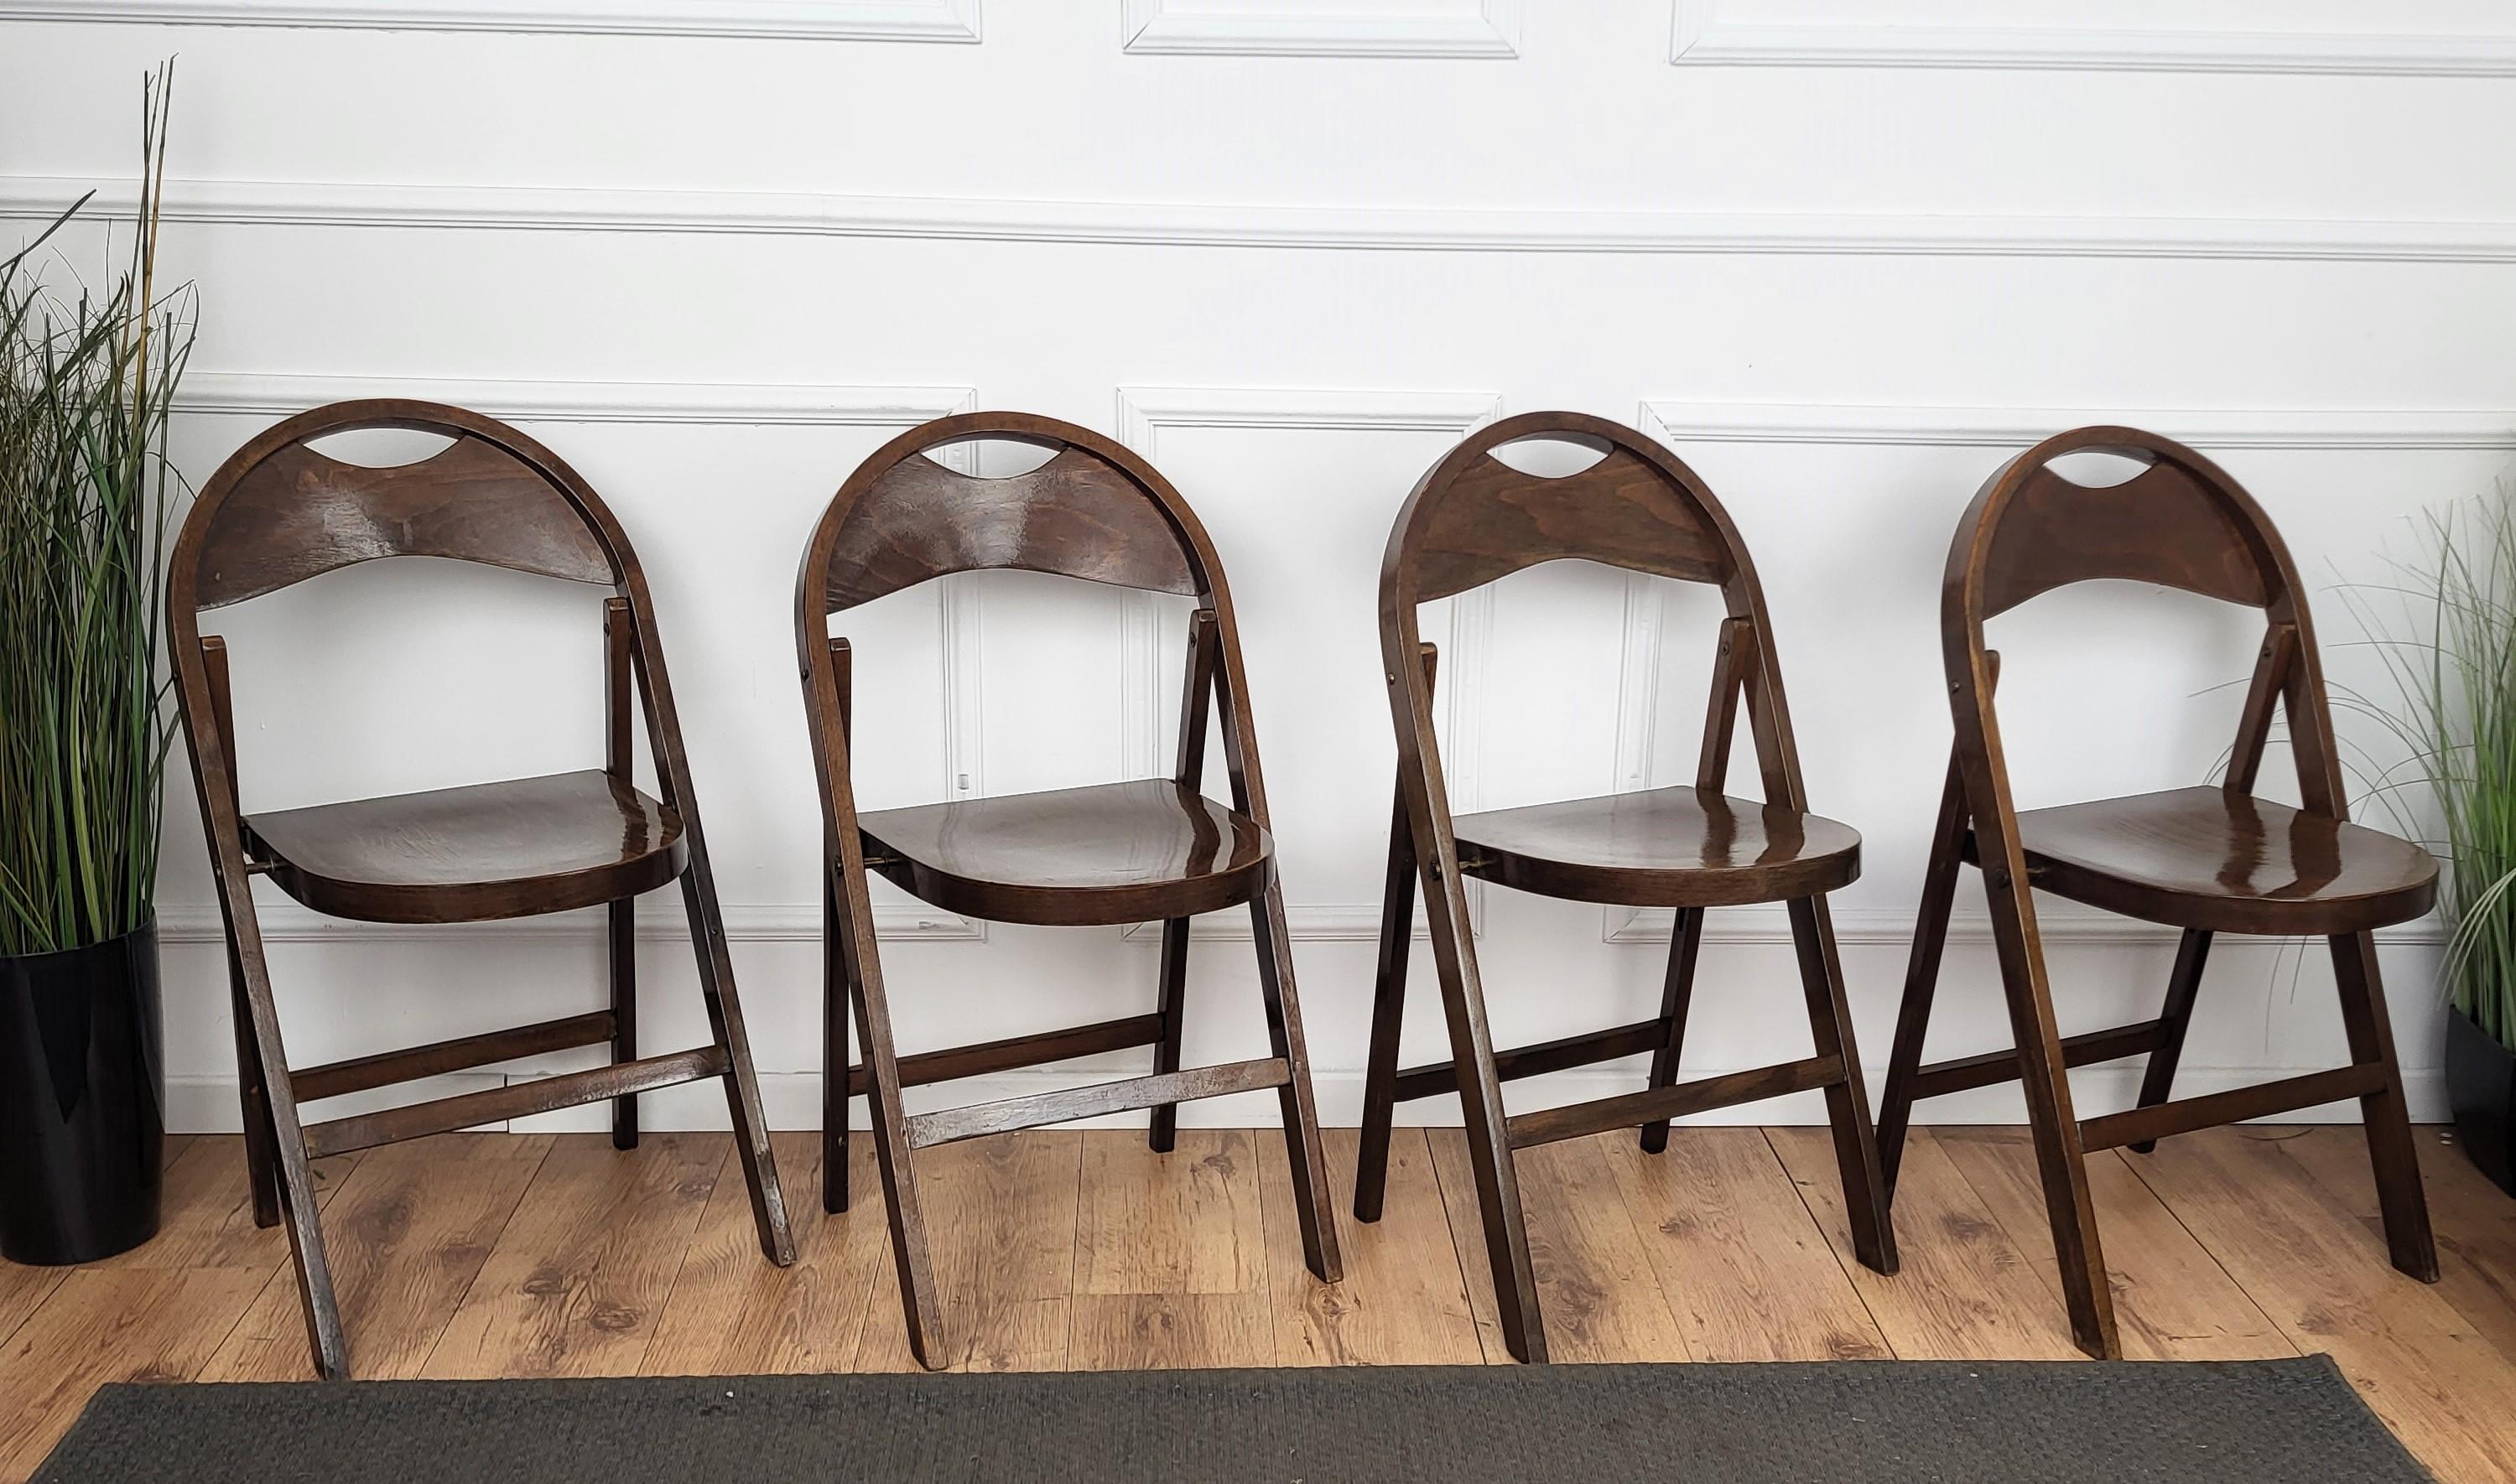 I offer a set of four folding chairs model B751 designed at the beginning of the 20th century by Thonet, manufactured in the early 1960s at the Thonet factory in Radomsko (central Poland). They were rarely used in a conferencial hall in one of the